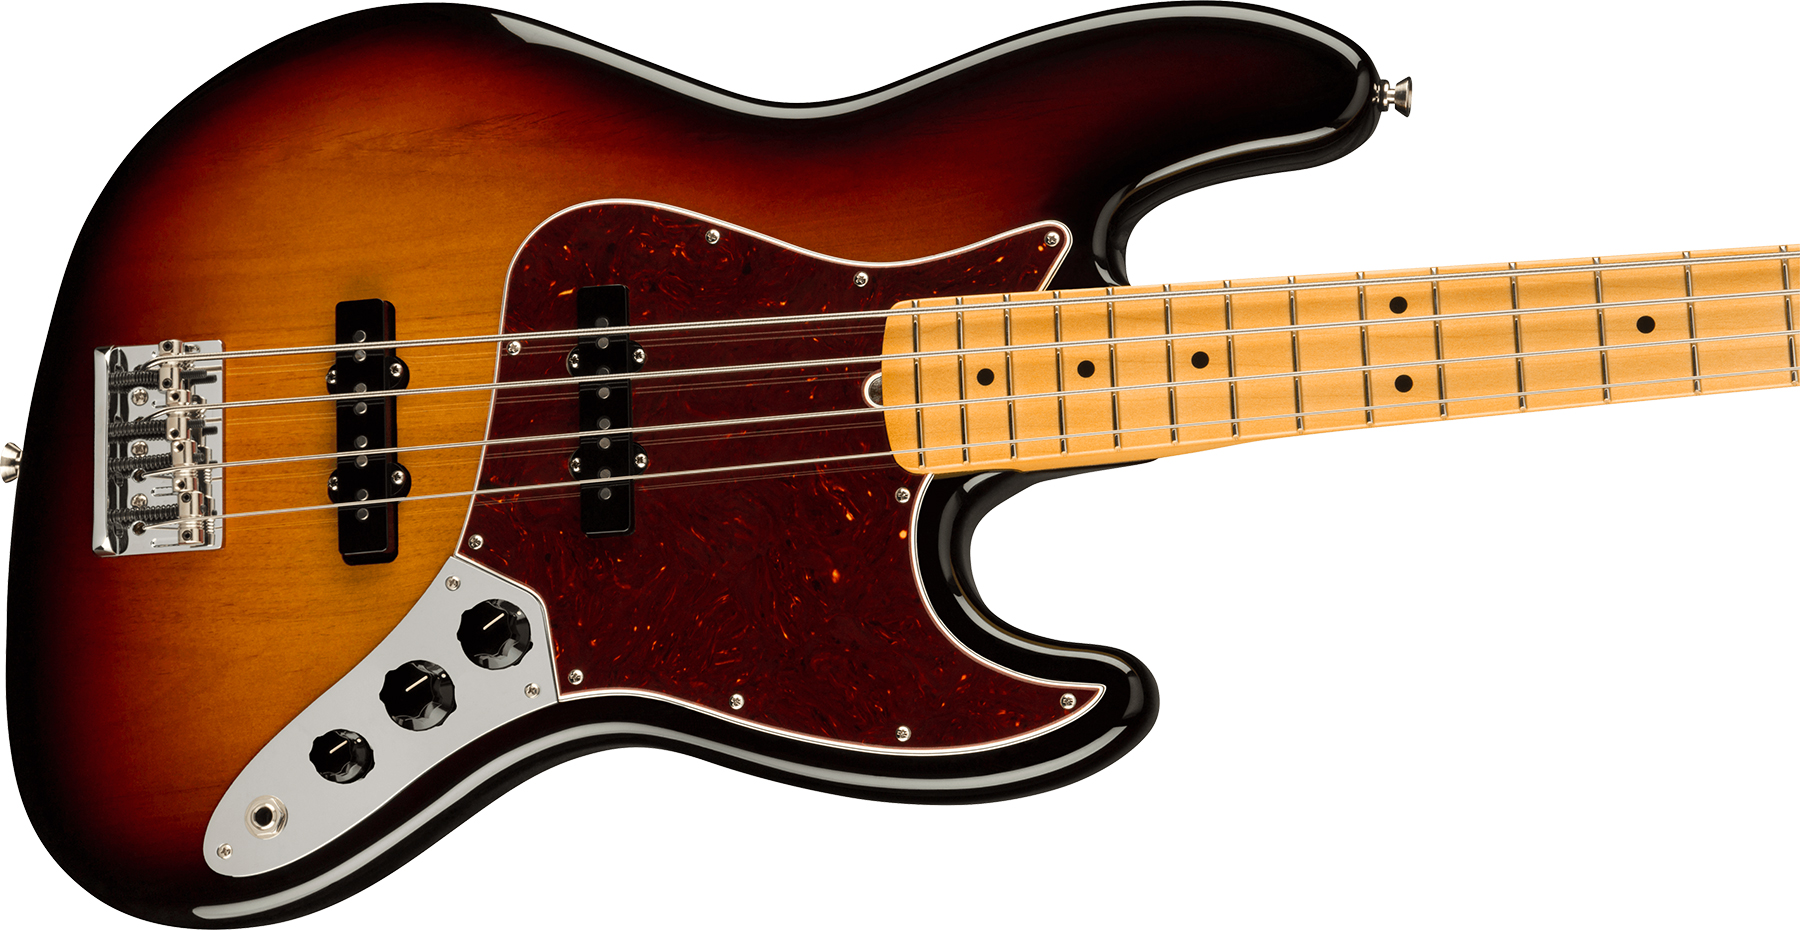 Fender Jazz Bass American Professional Ii Usa Mn - 3-color Sunburst - Solid body electric bass - Variation 2